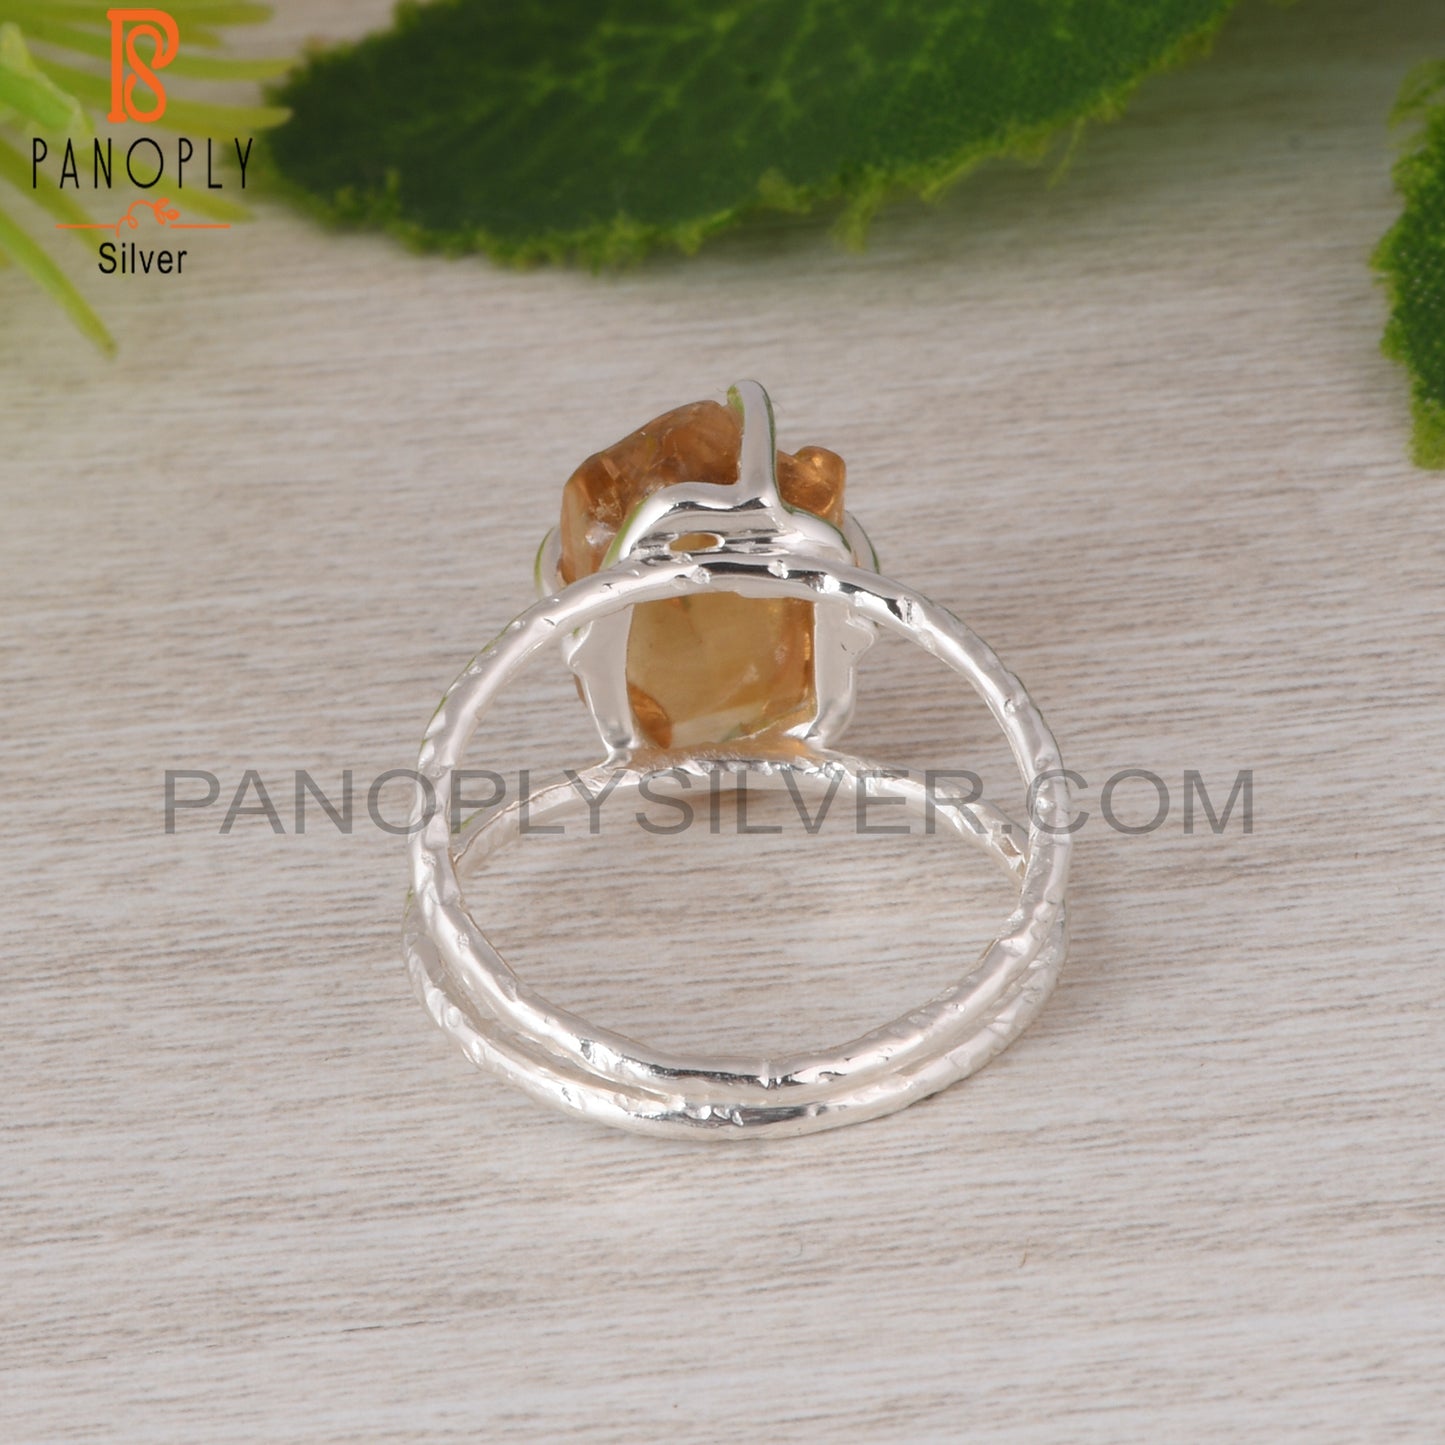 Citrine Rough 925 Sterling Silver Two Band Ring